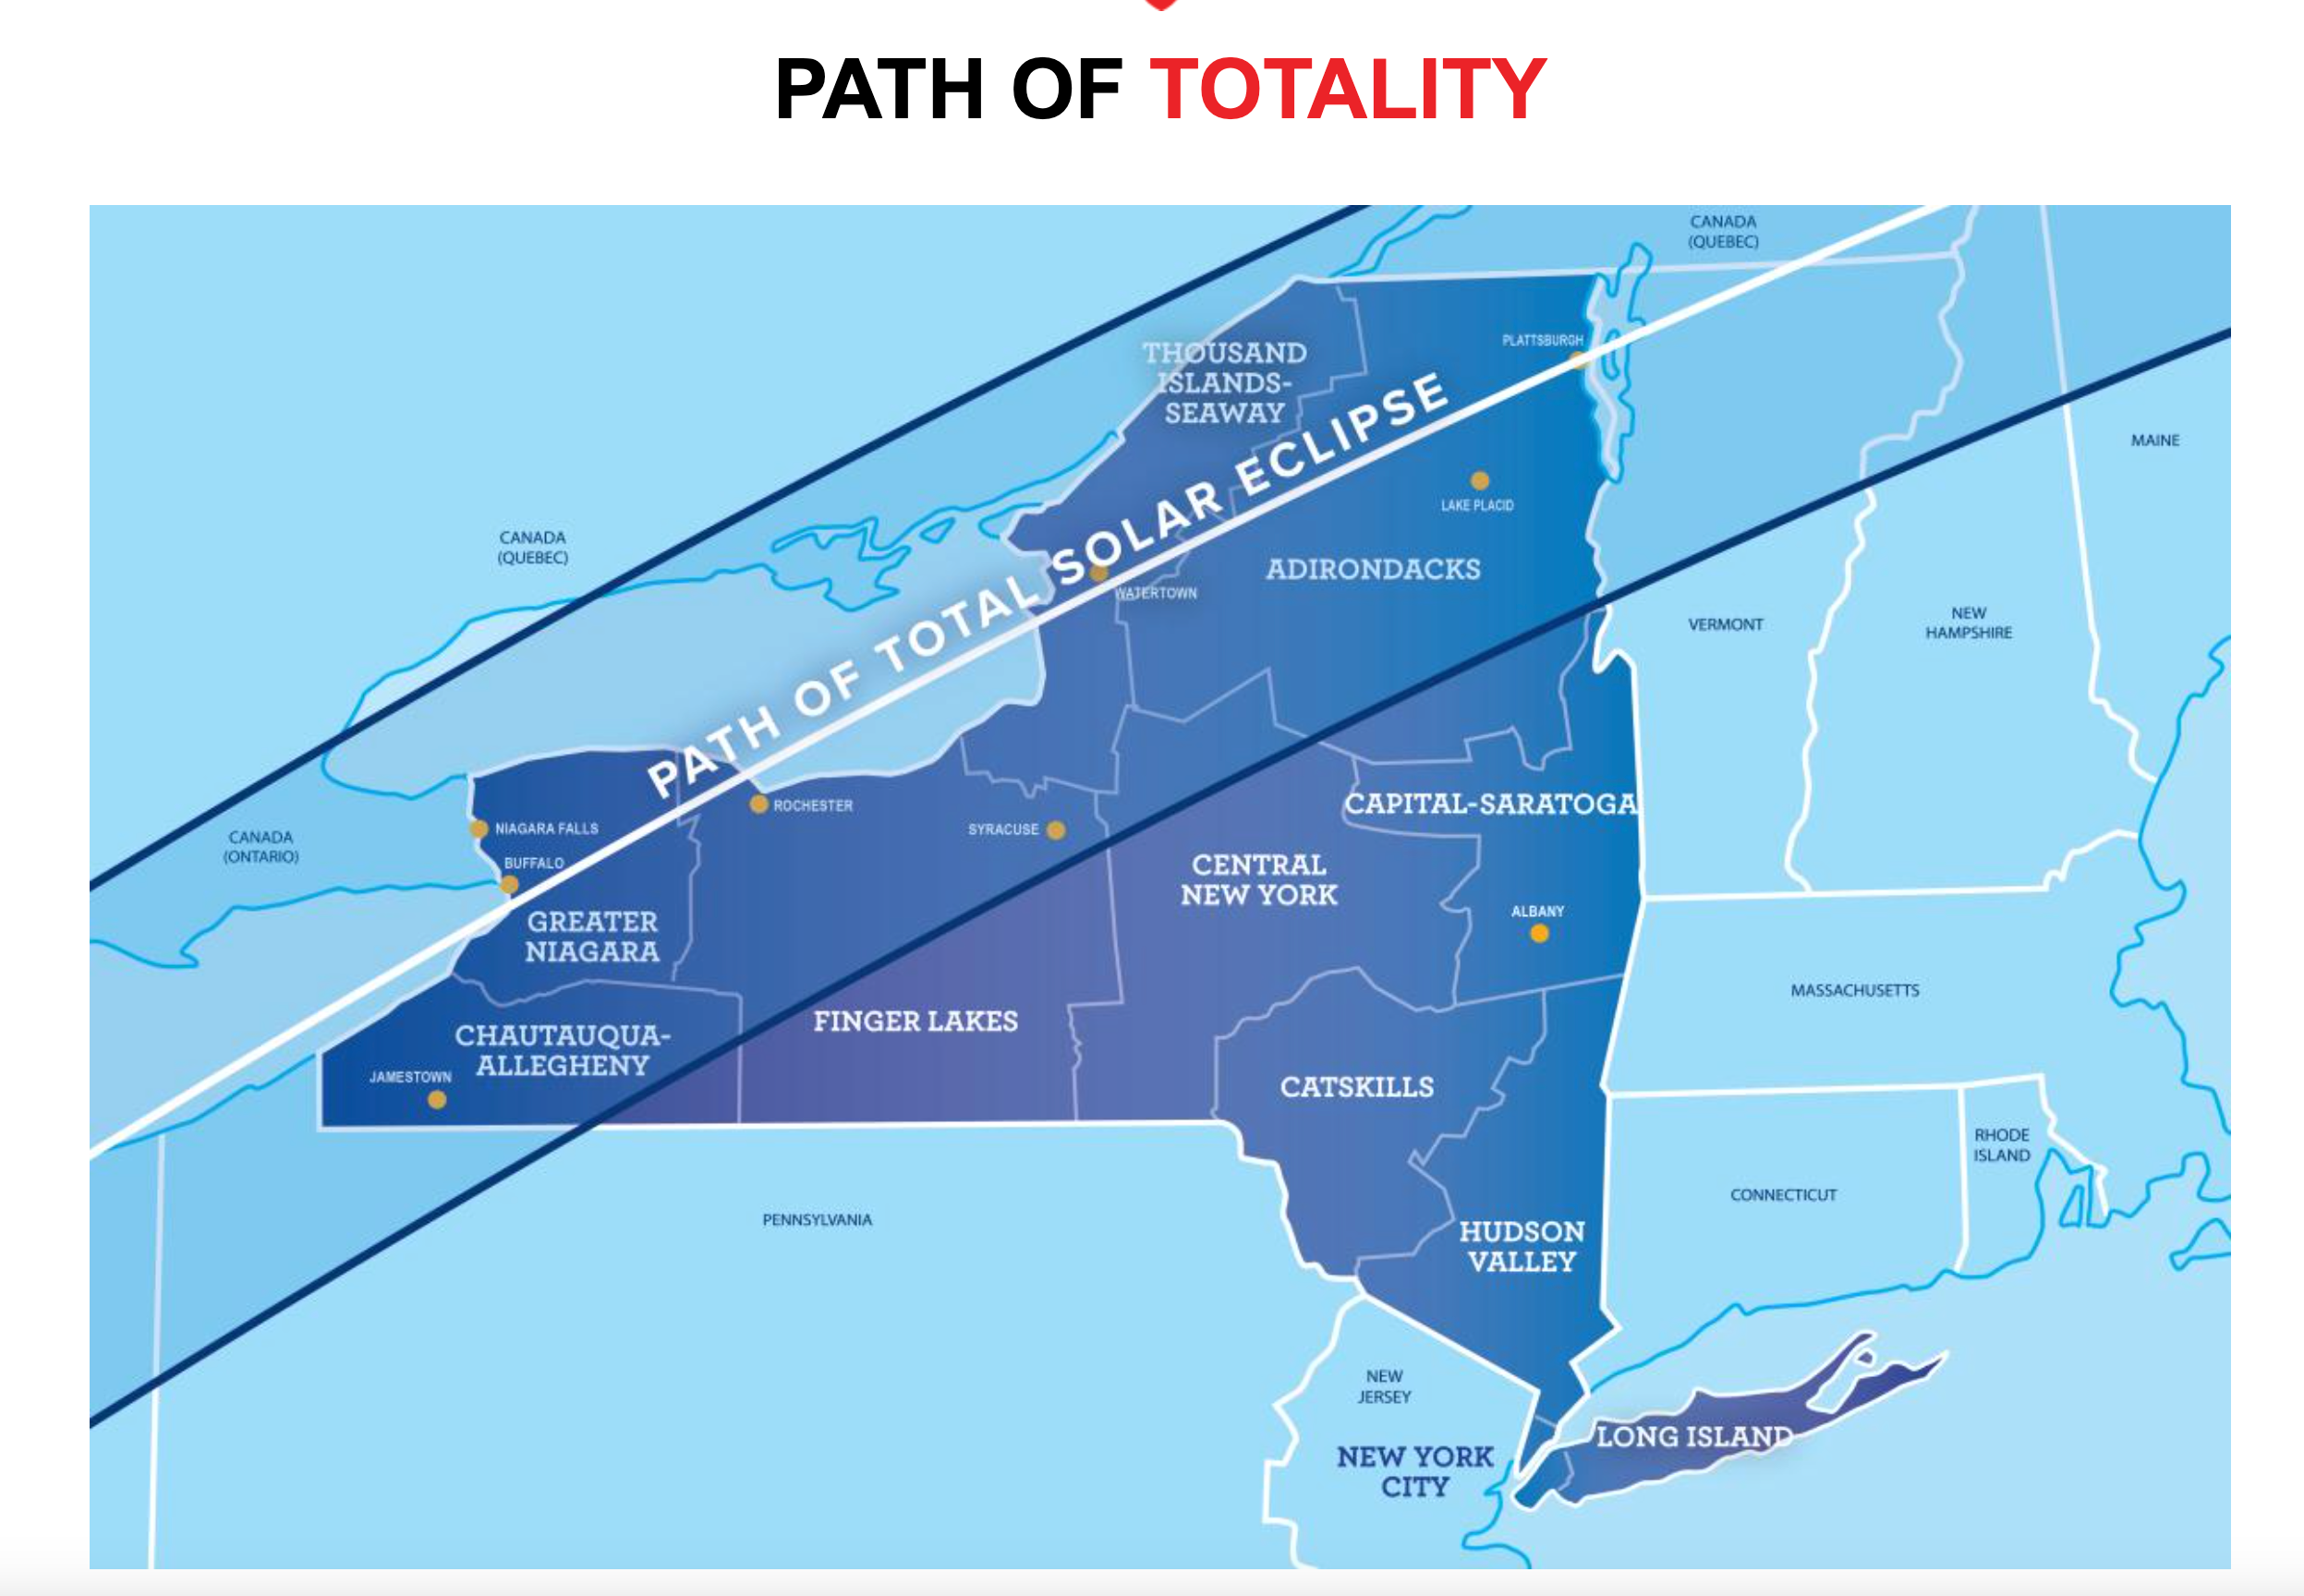 Path of totality map from I love New York.